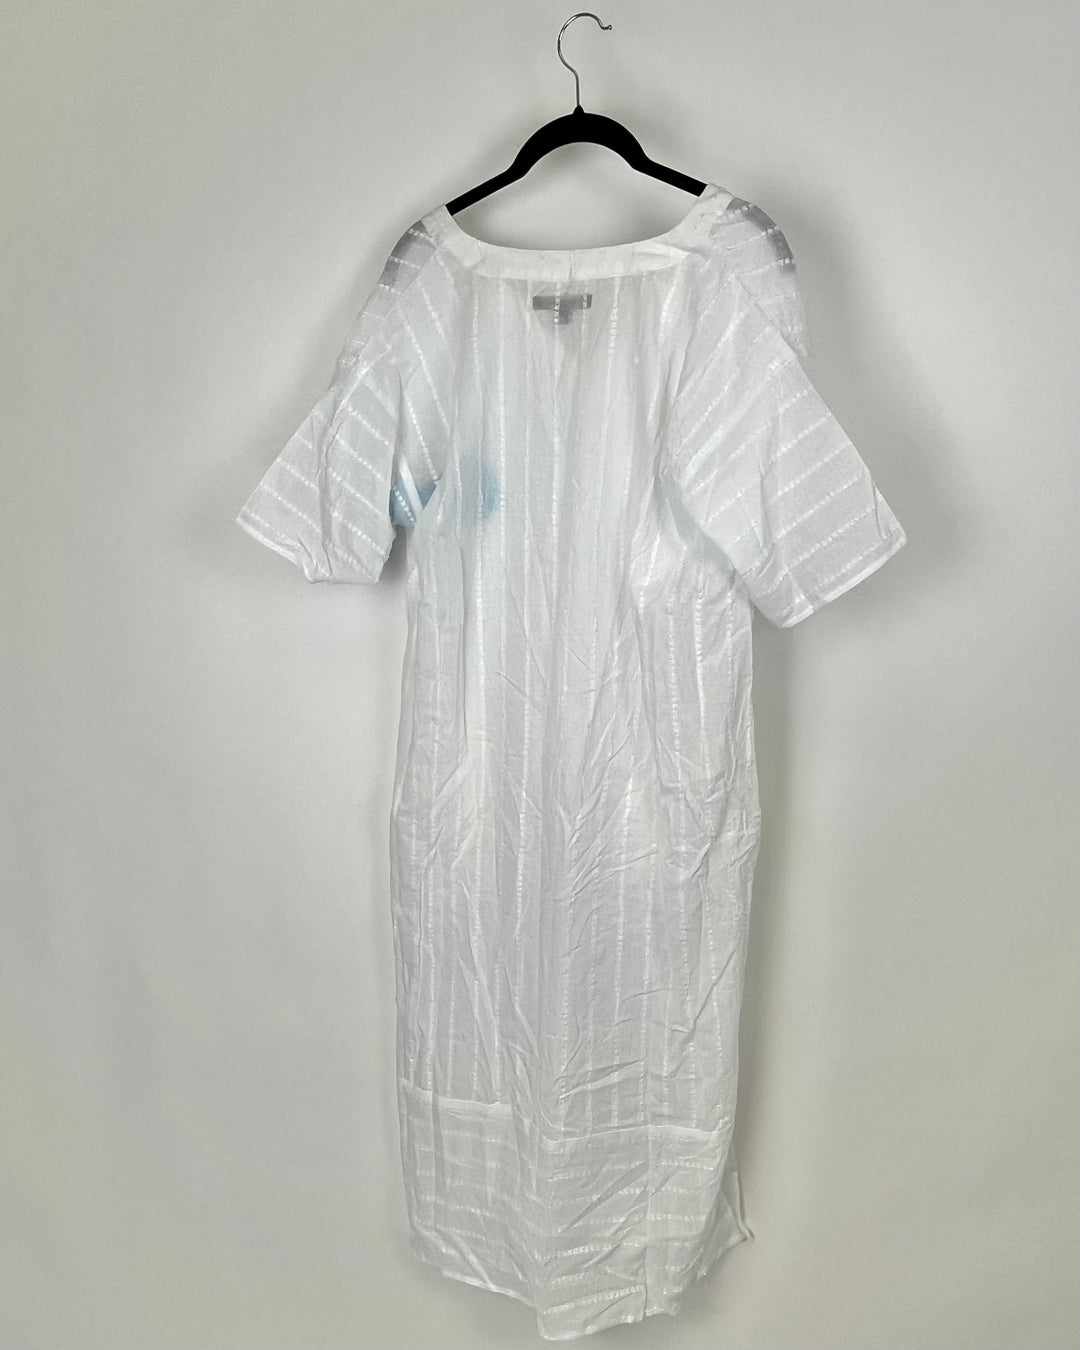 Sheer White Nightgown - Small